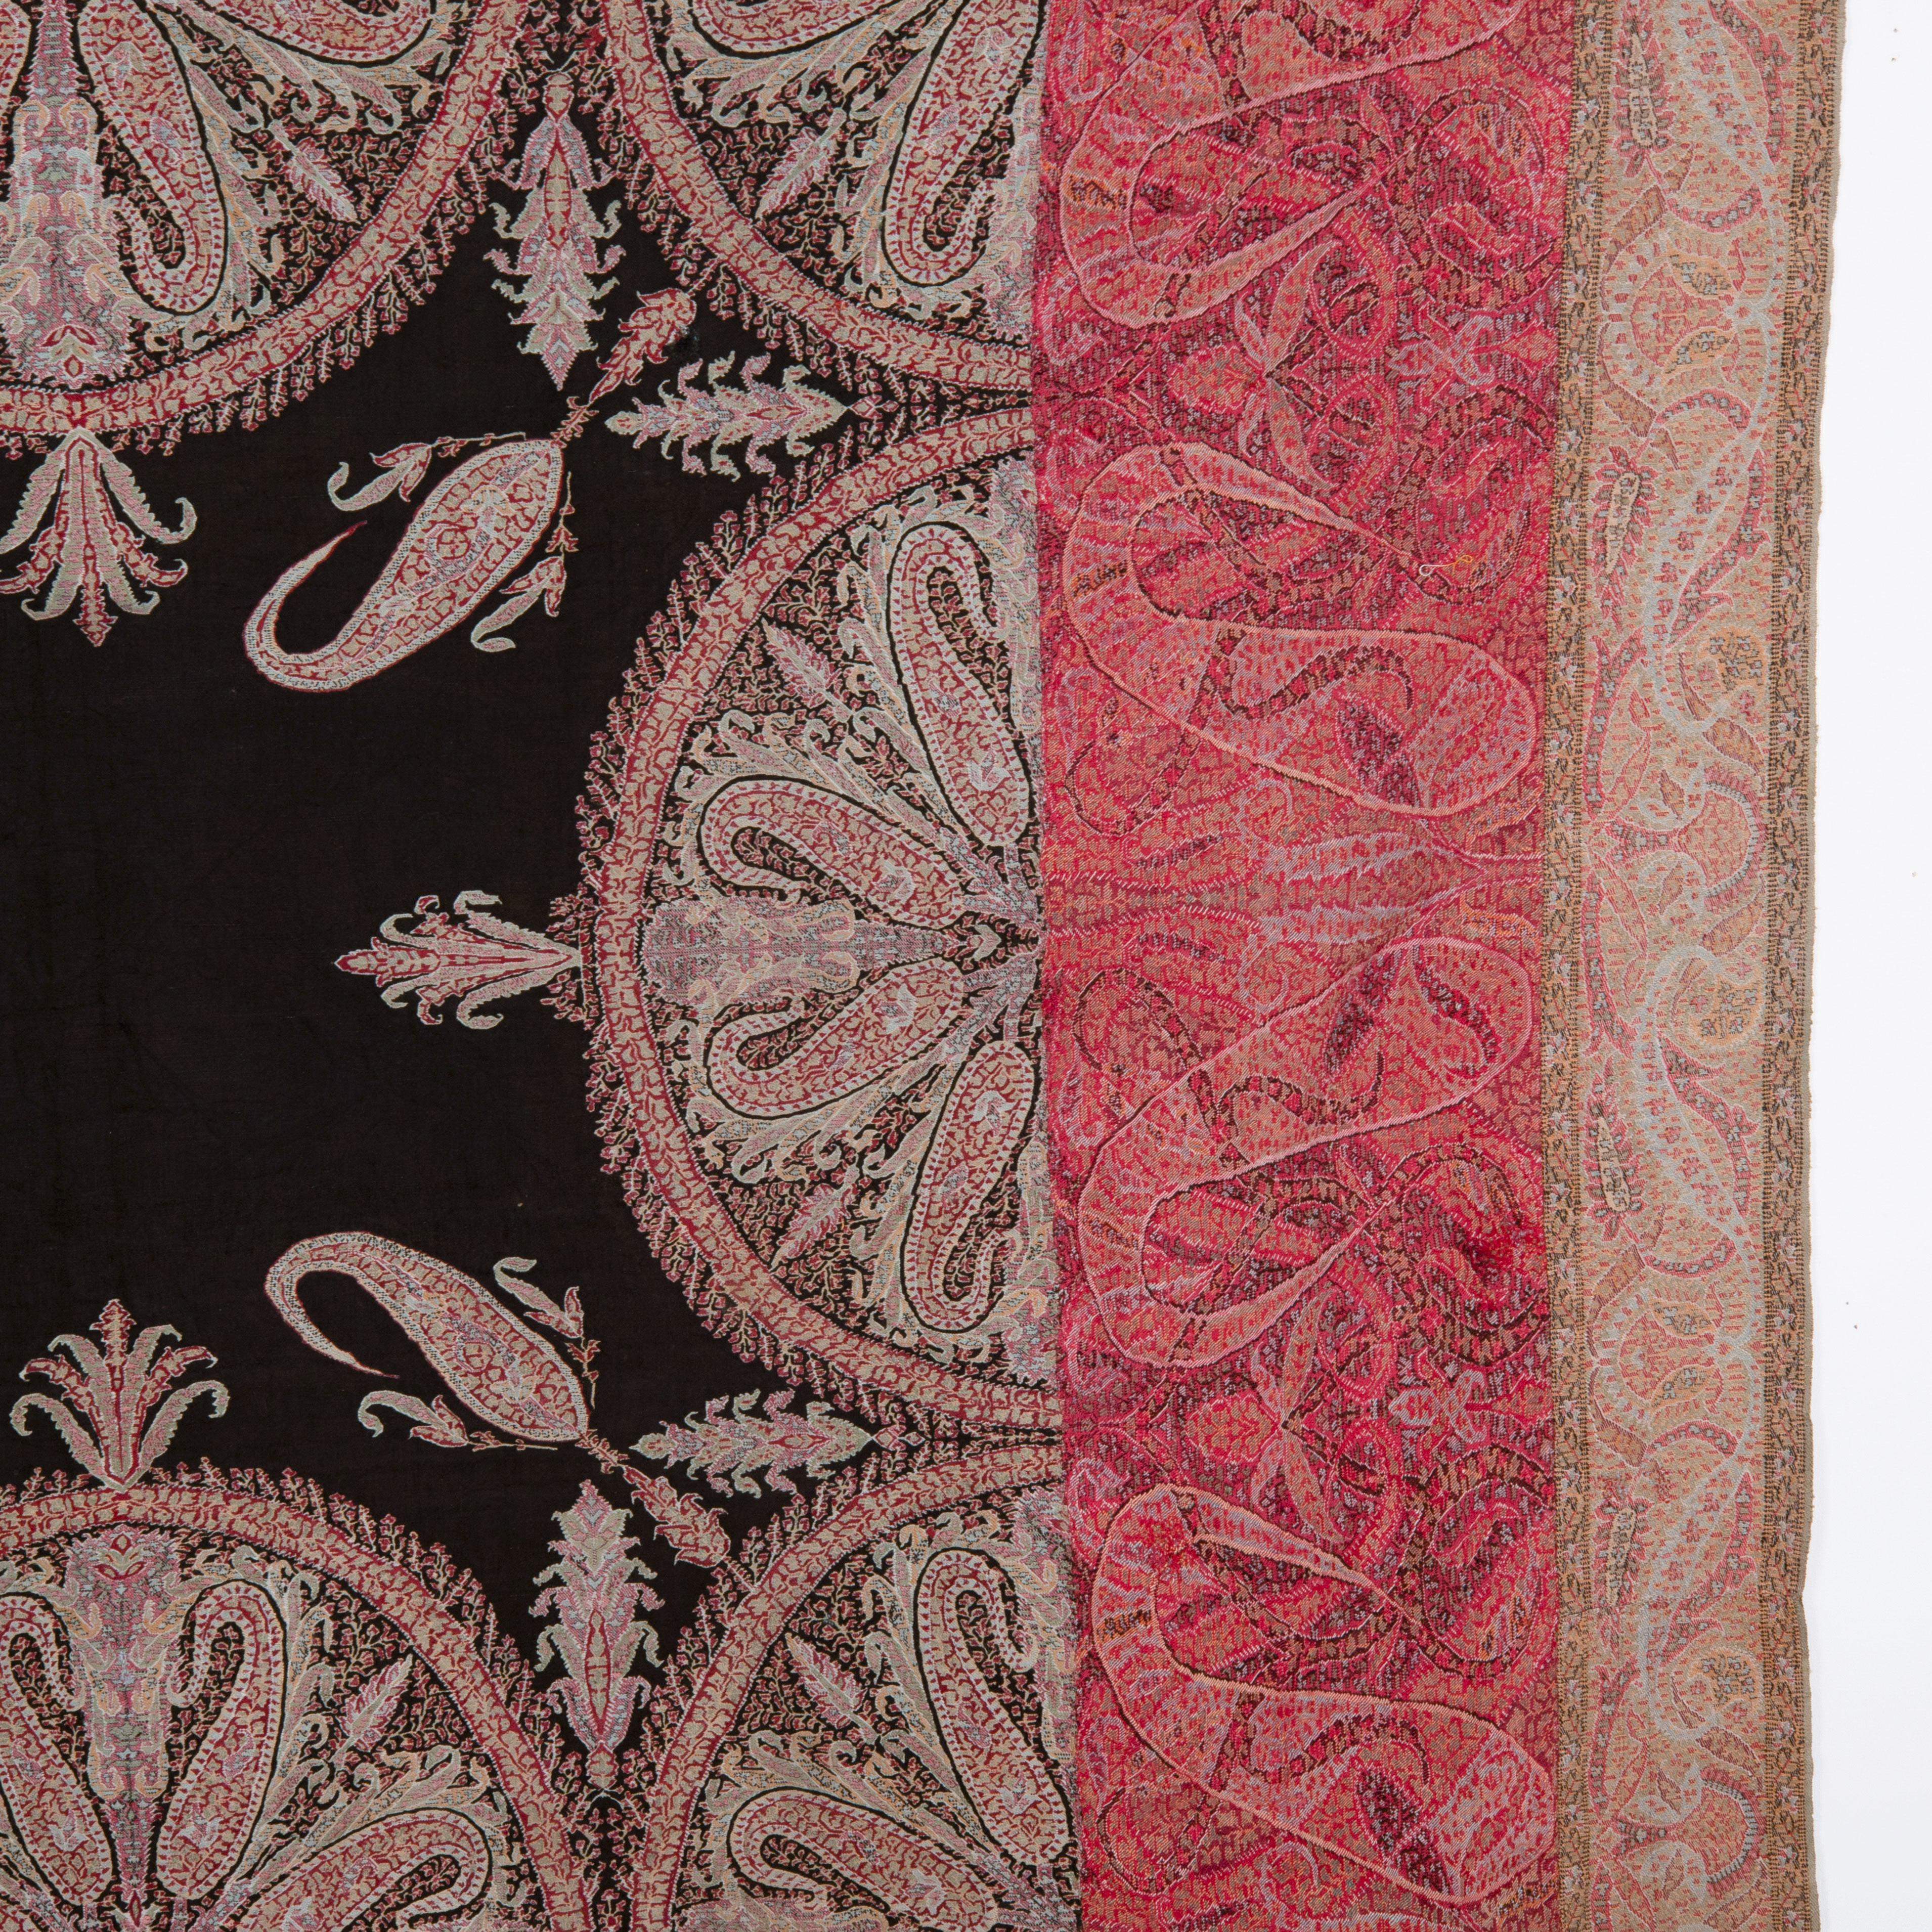 Hand-Woven Kashmir Shawl Fragment, 19th C, India For Sale